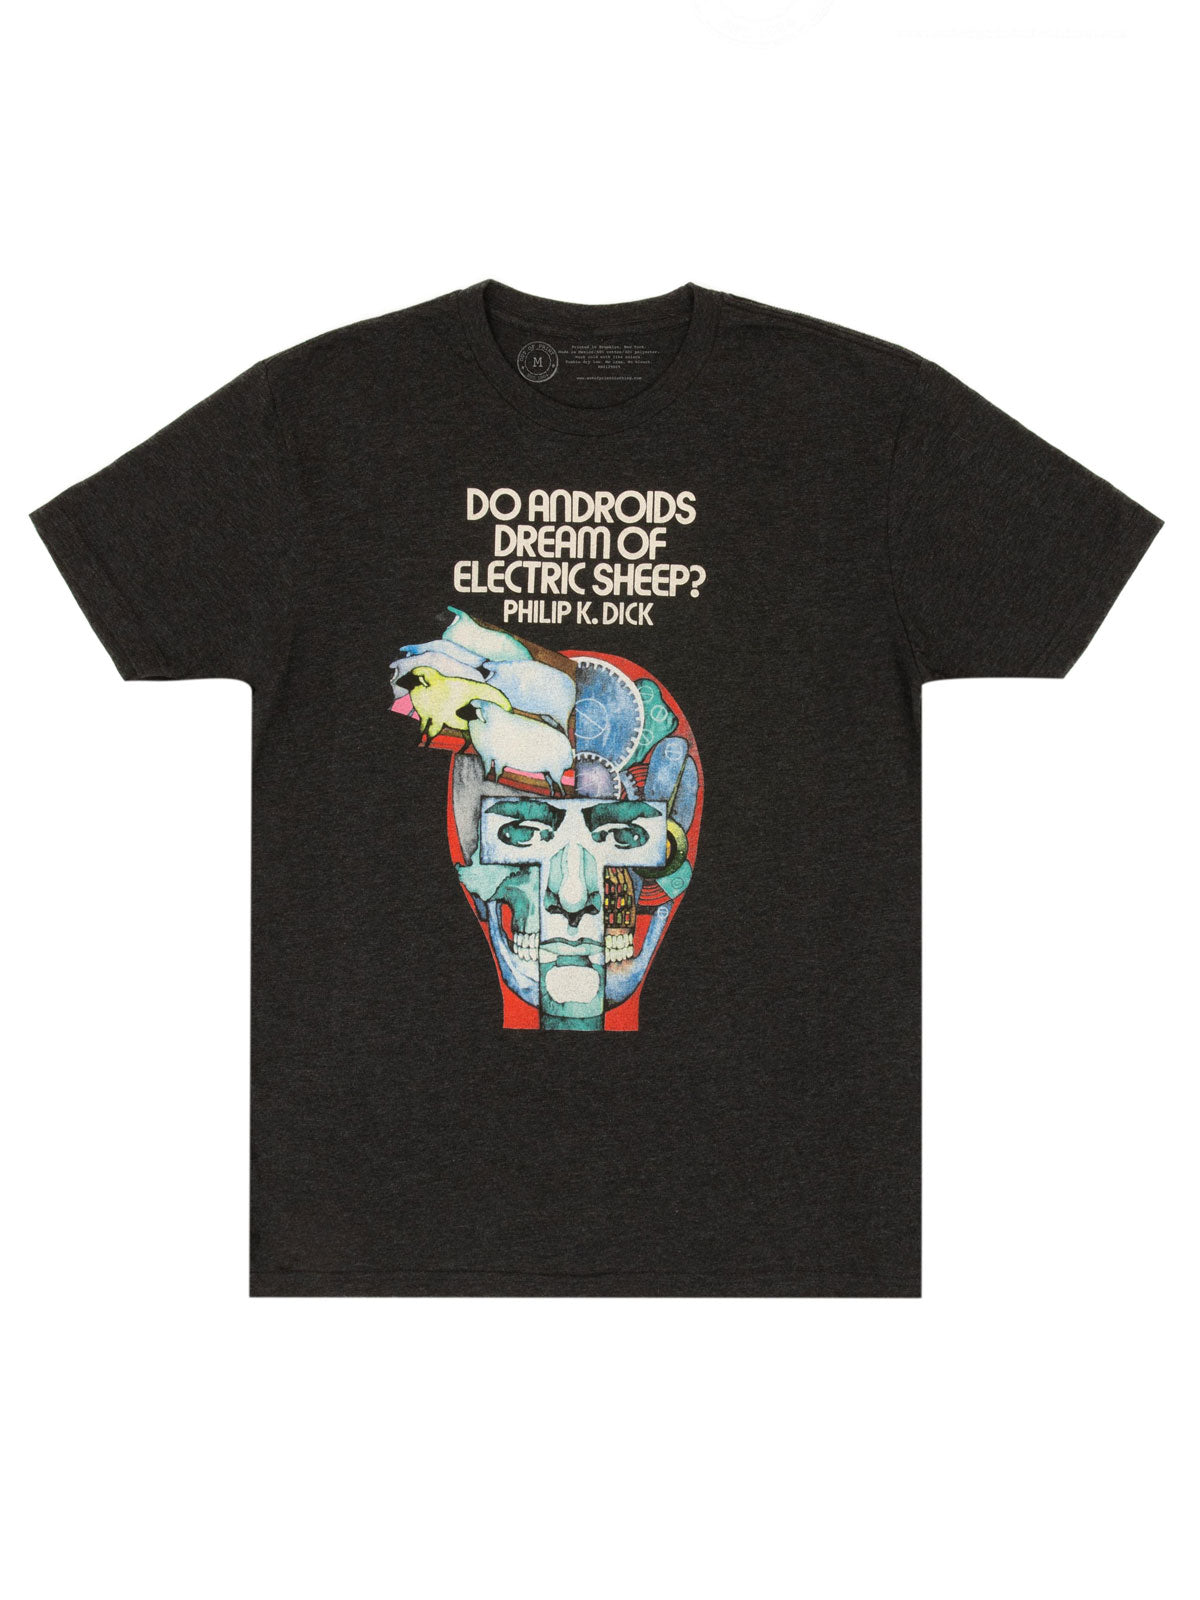 Do Androids Dream of Electric Sheep? Book Cover Tee and Socks Collection